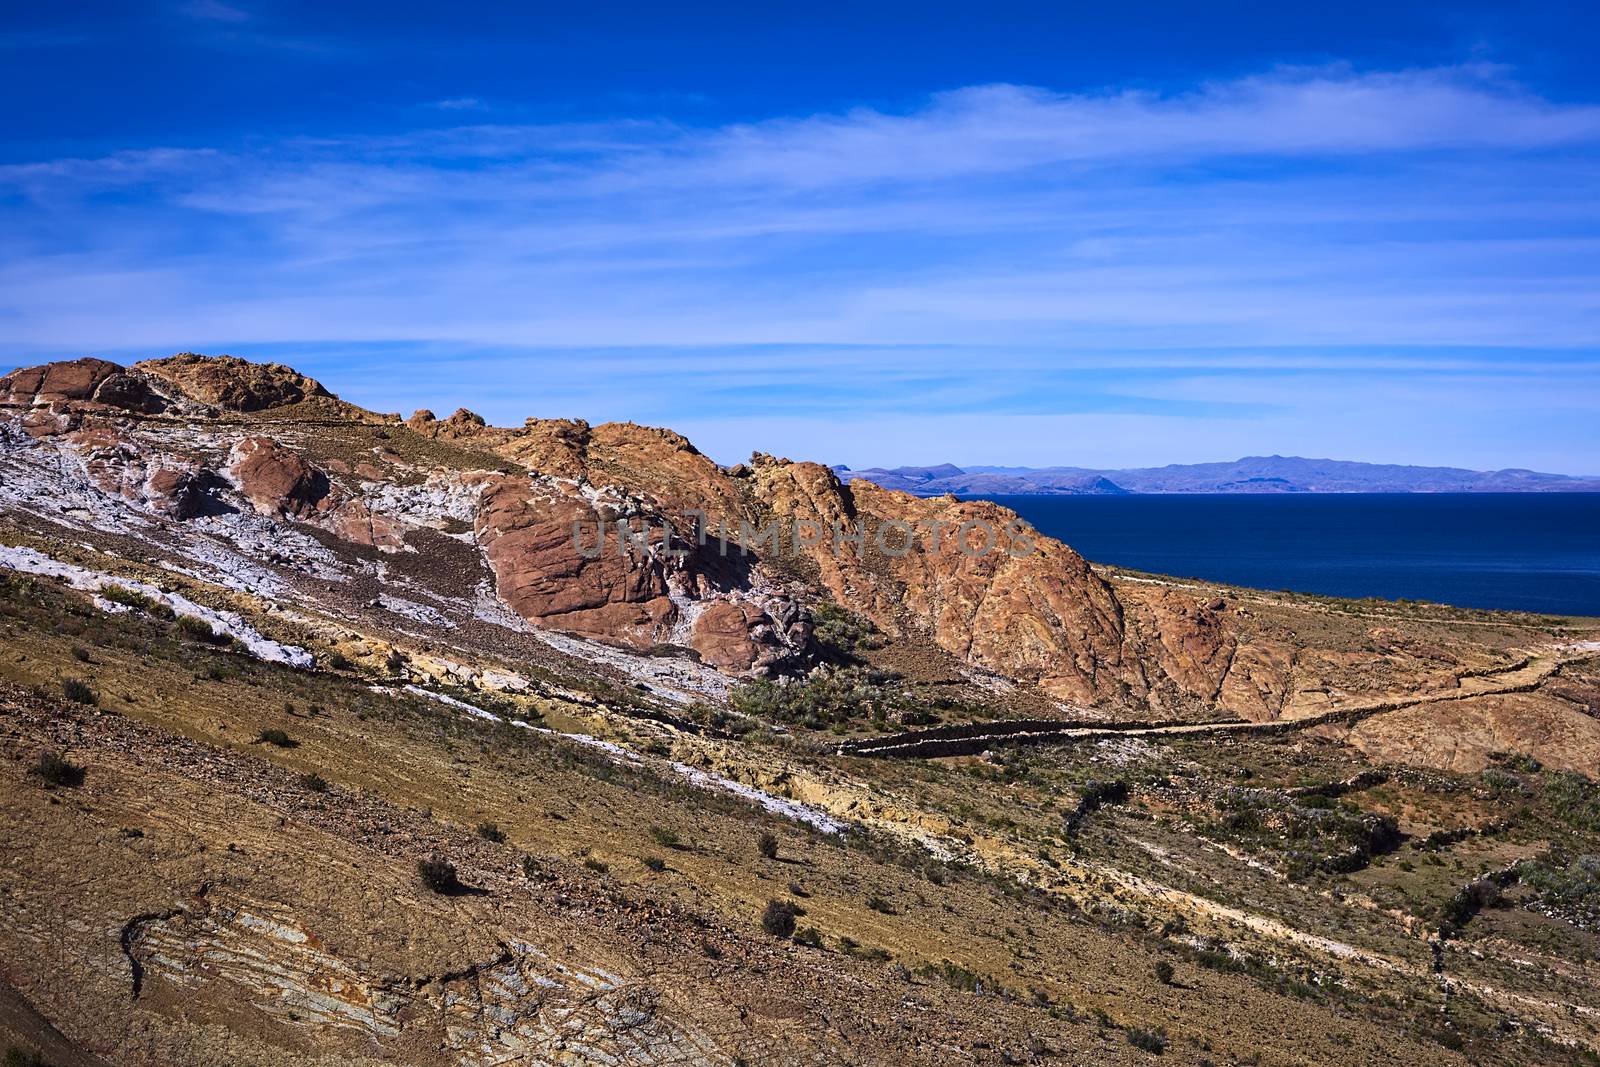 Colorful rocky hillside with path leading to the archeological site on the northern part of the Isla del Sol (Island of the Sun) in Lake Titicaca, which is a popular travel destination in Bolivia